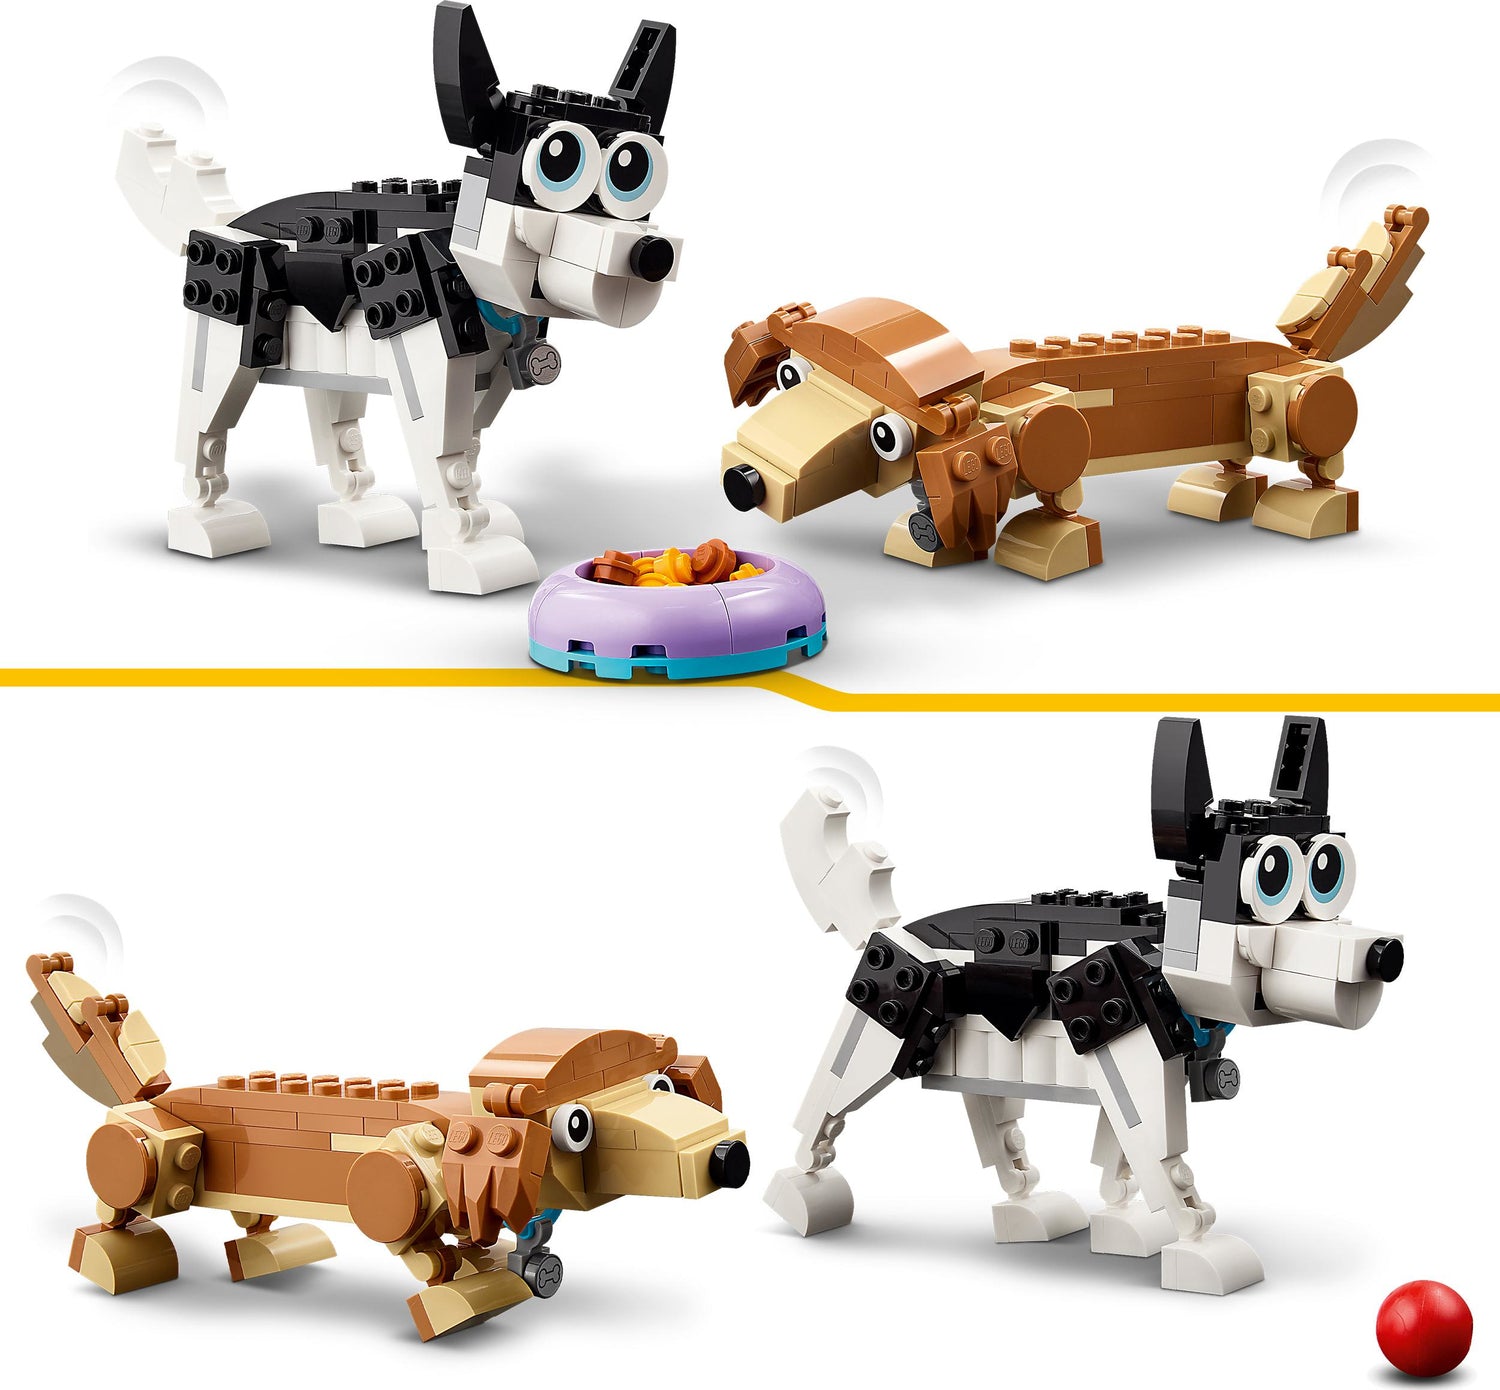 LEGO® Creator 3-in-1: Adorable Dogs Animal Toys